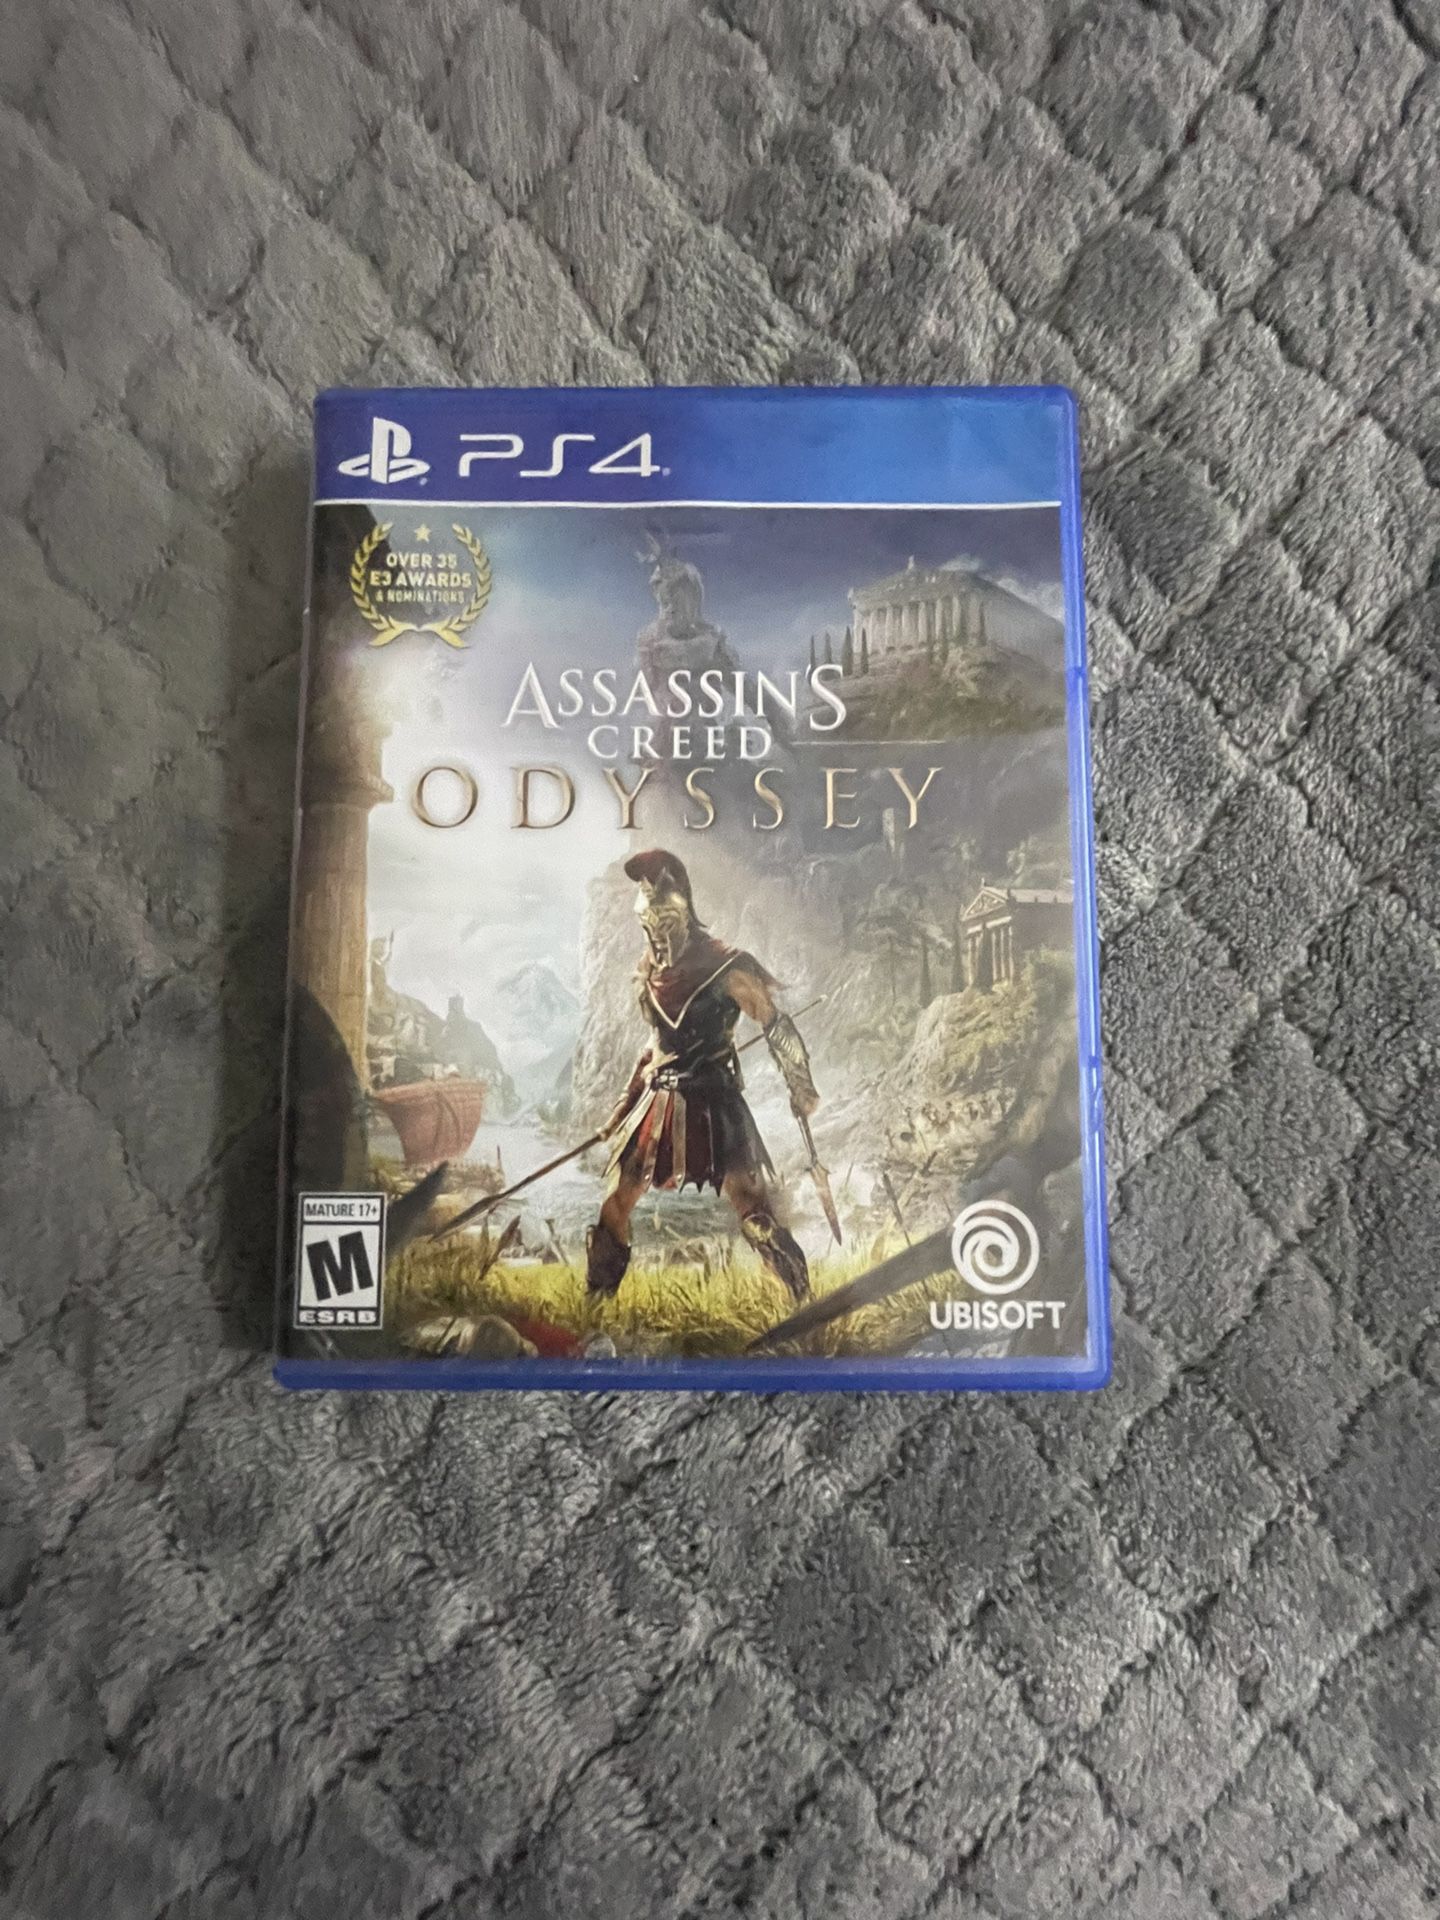 PS4 Assasin’s Creed Odyssey Game